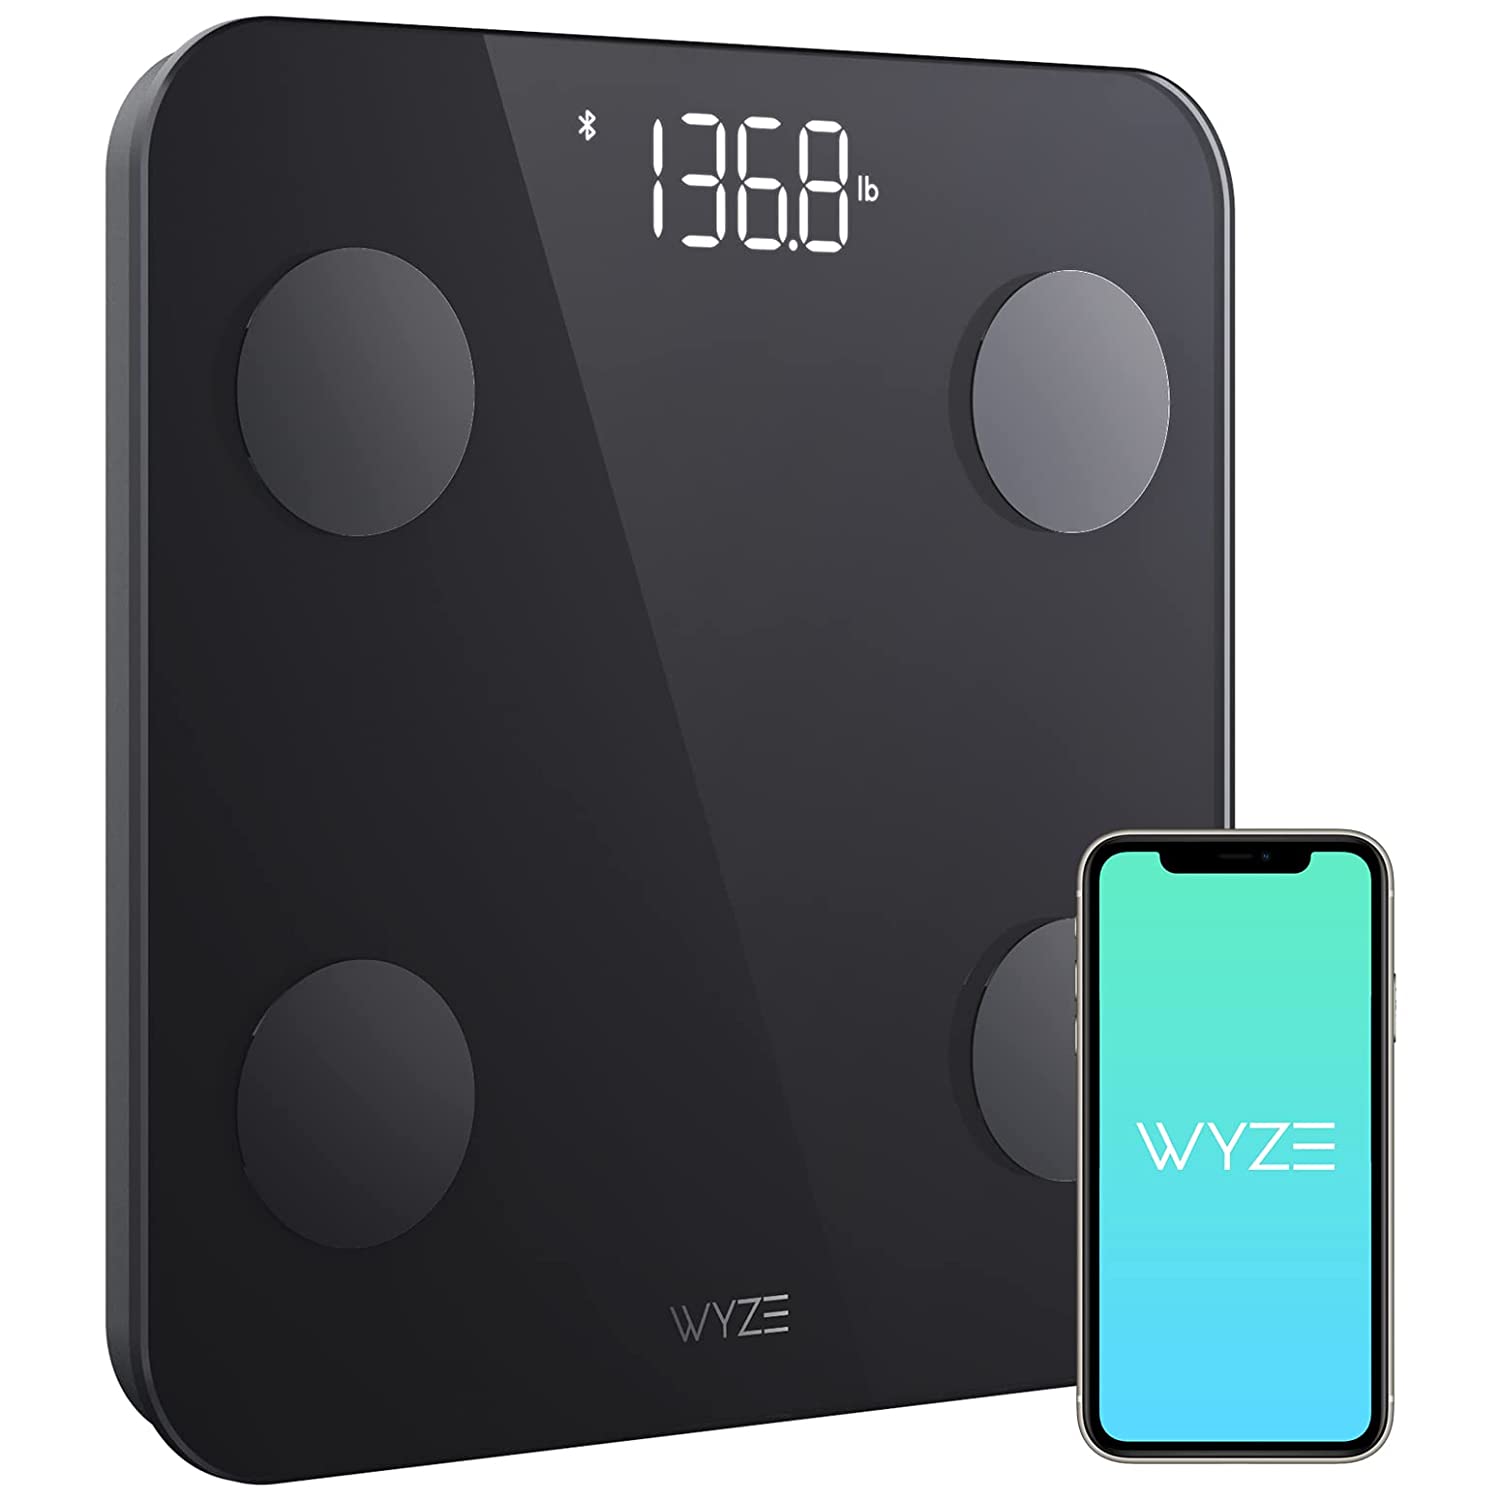 Fitbit Scale vs. Wyze Scale